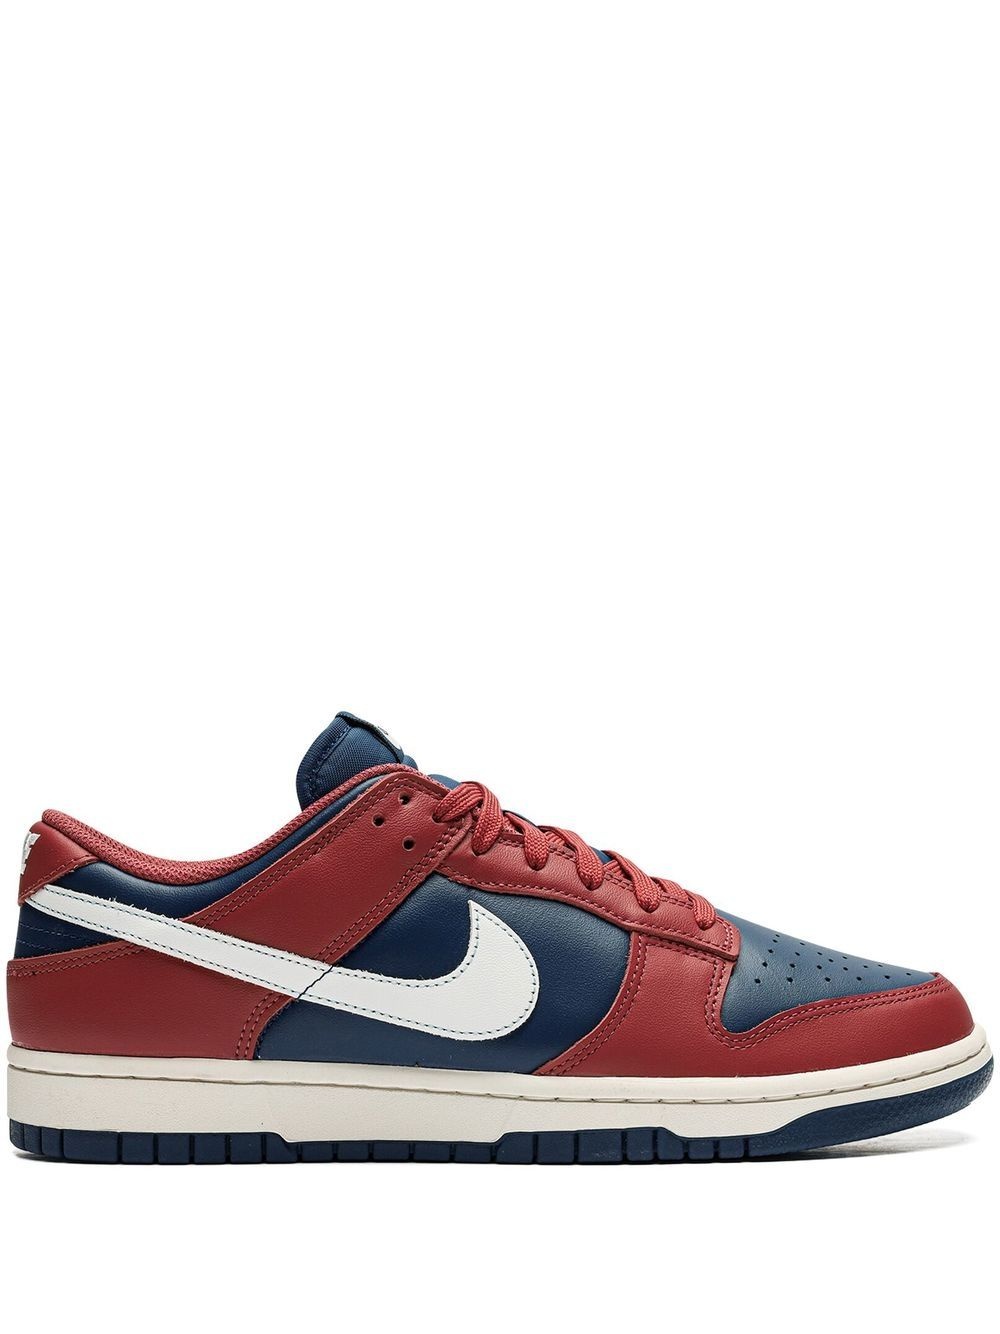 Dunk Low Retro "Canyon Rust" sneakers - 1